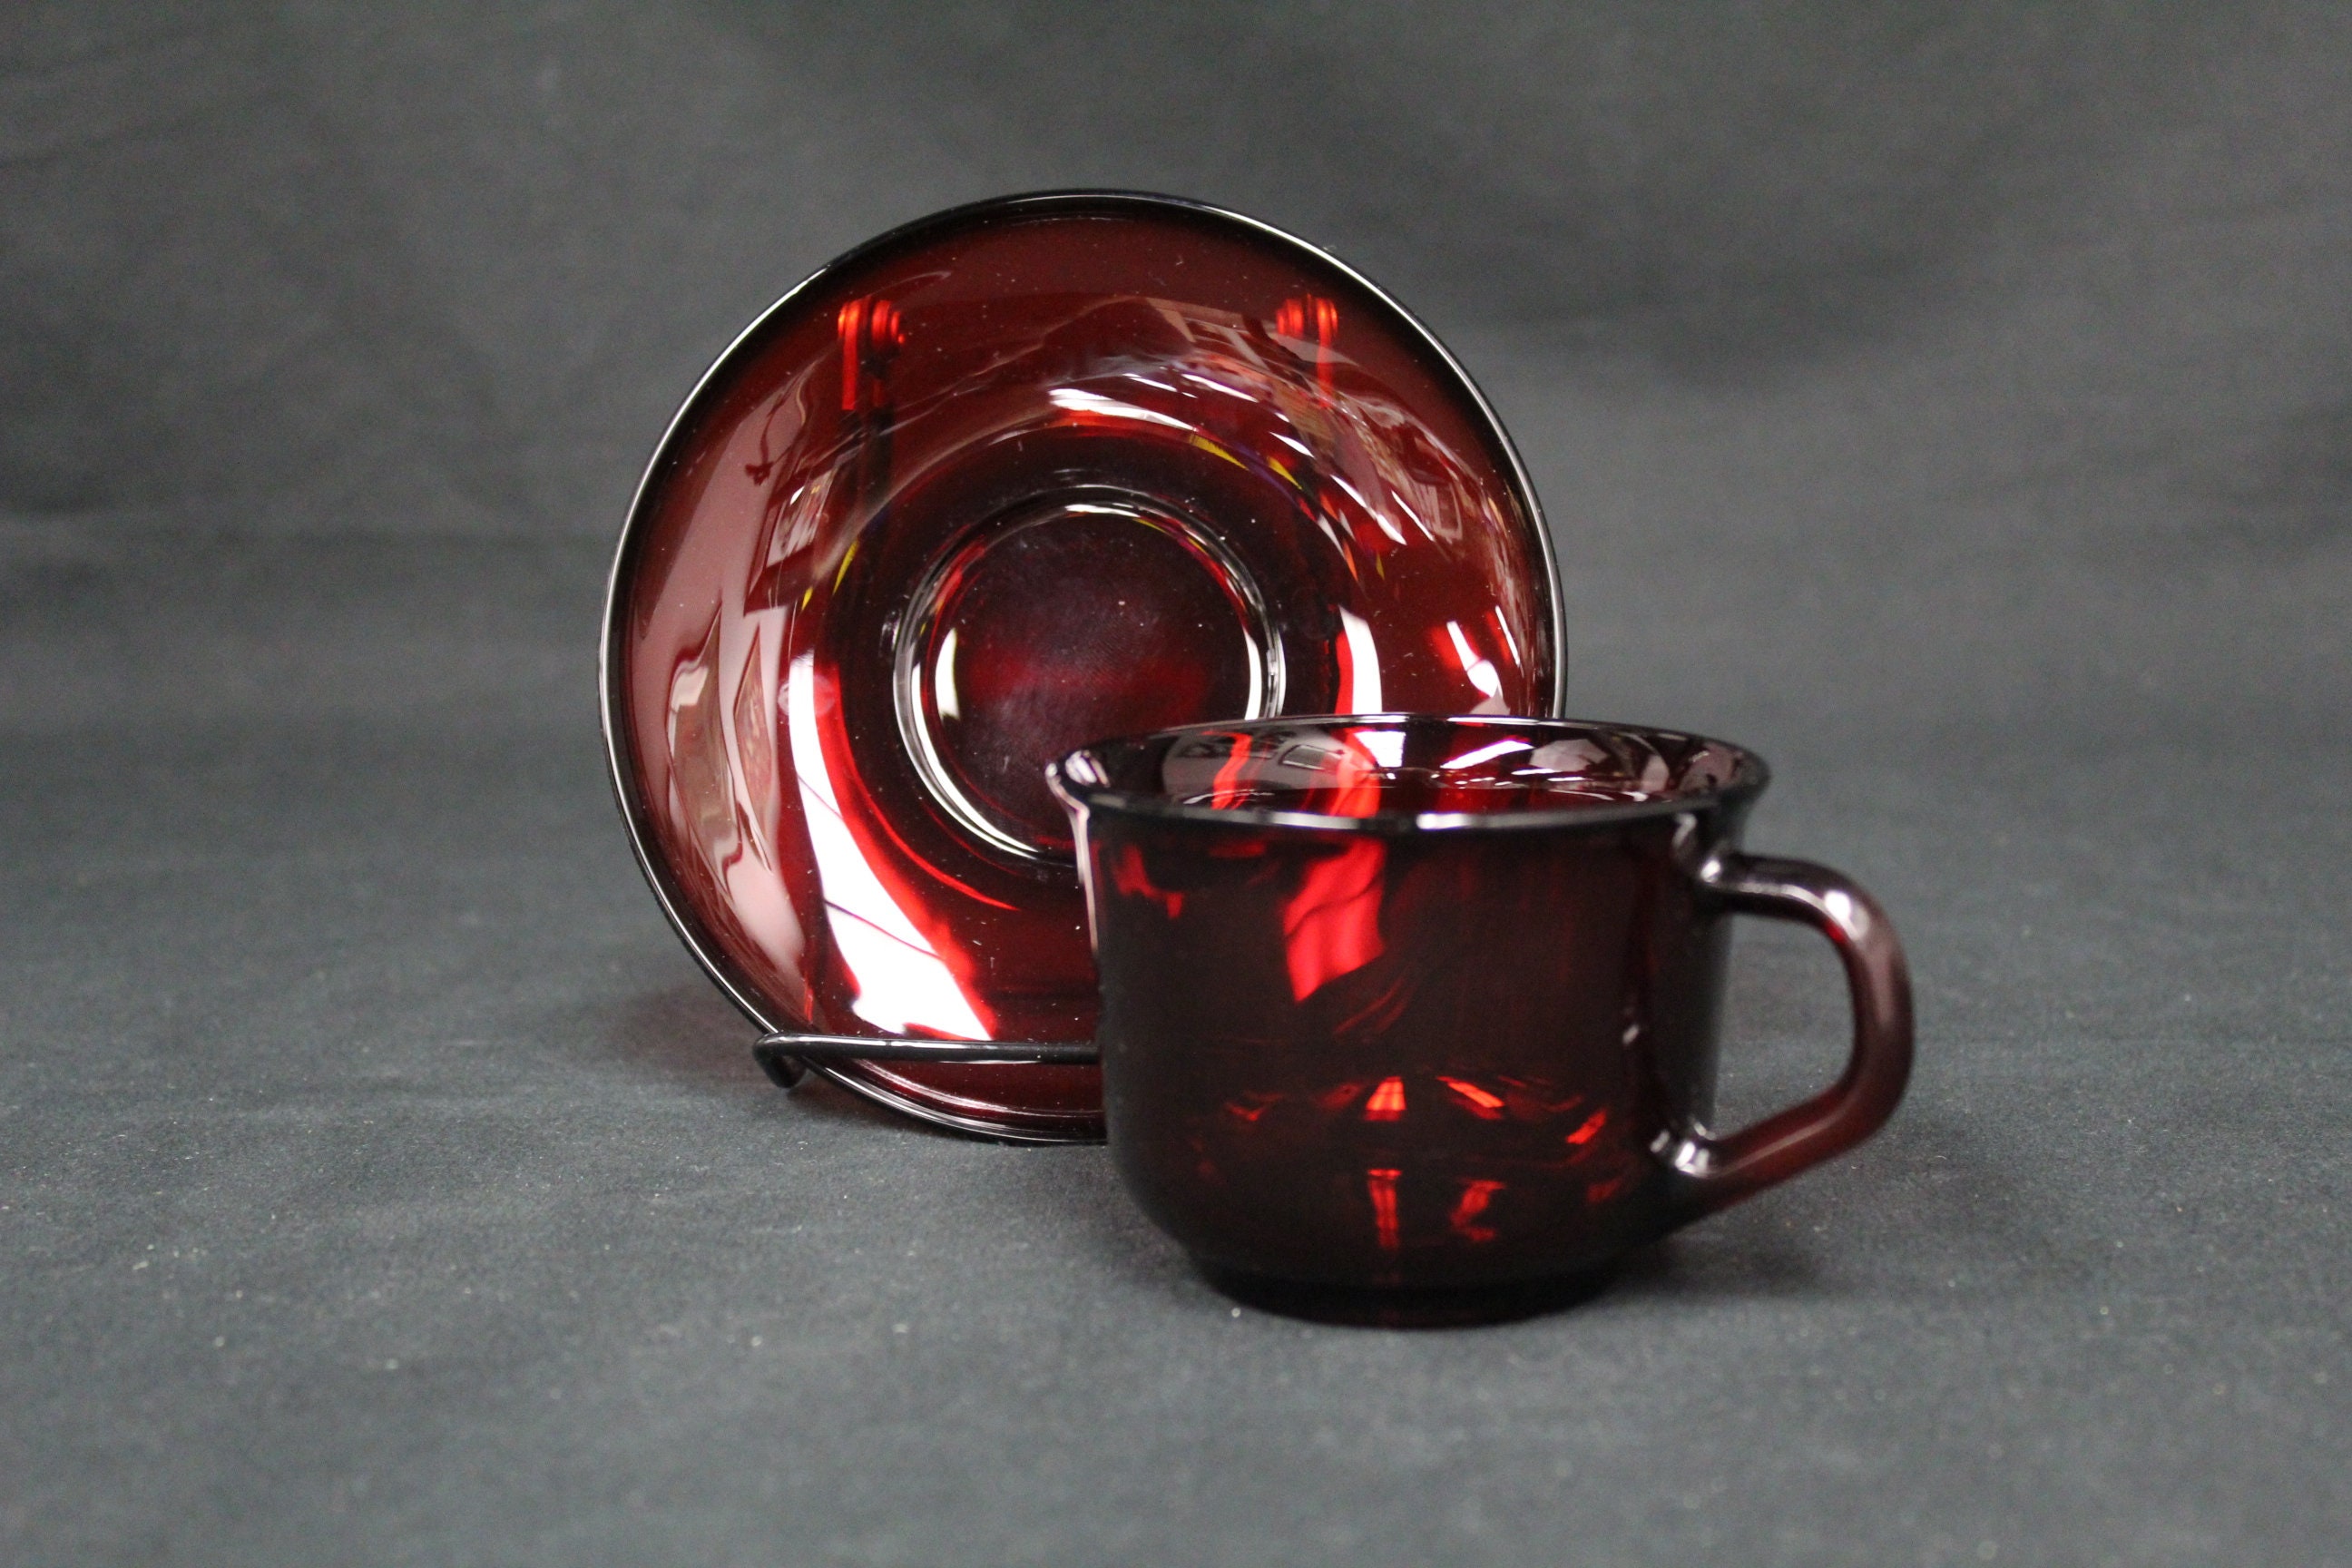 Red Co. Set of 6 Clear Glass 6.75 Oz Footed Tea and Coffee Mugs — Red Co.  Goods